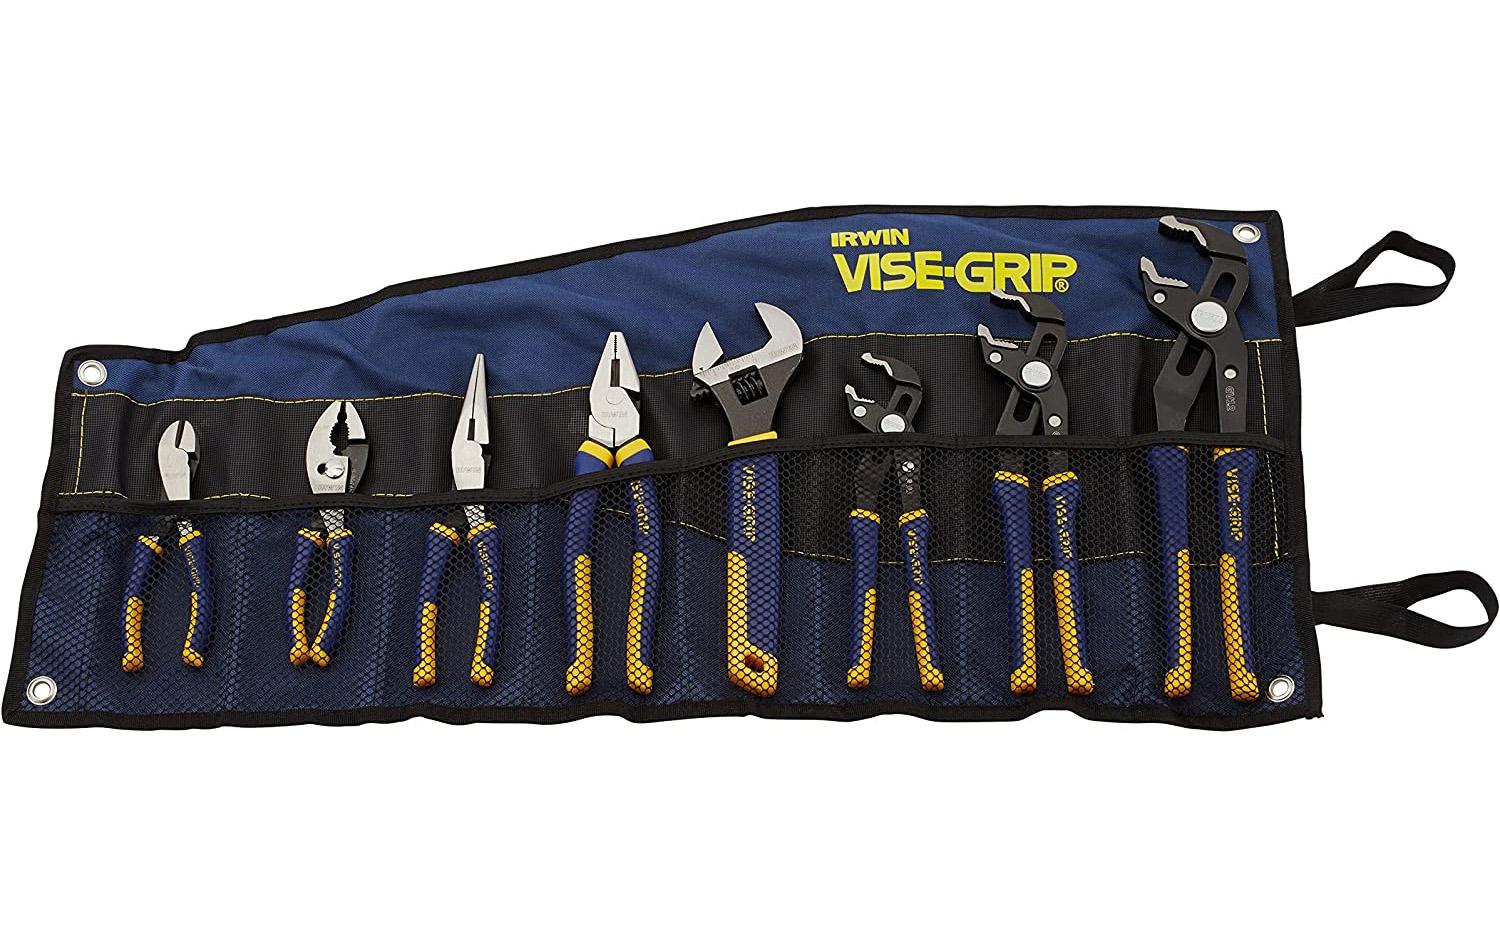 Irwin Vise-Grip GrooveLock Pliers for $74.99 Shipped